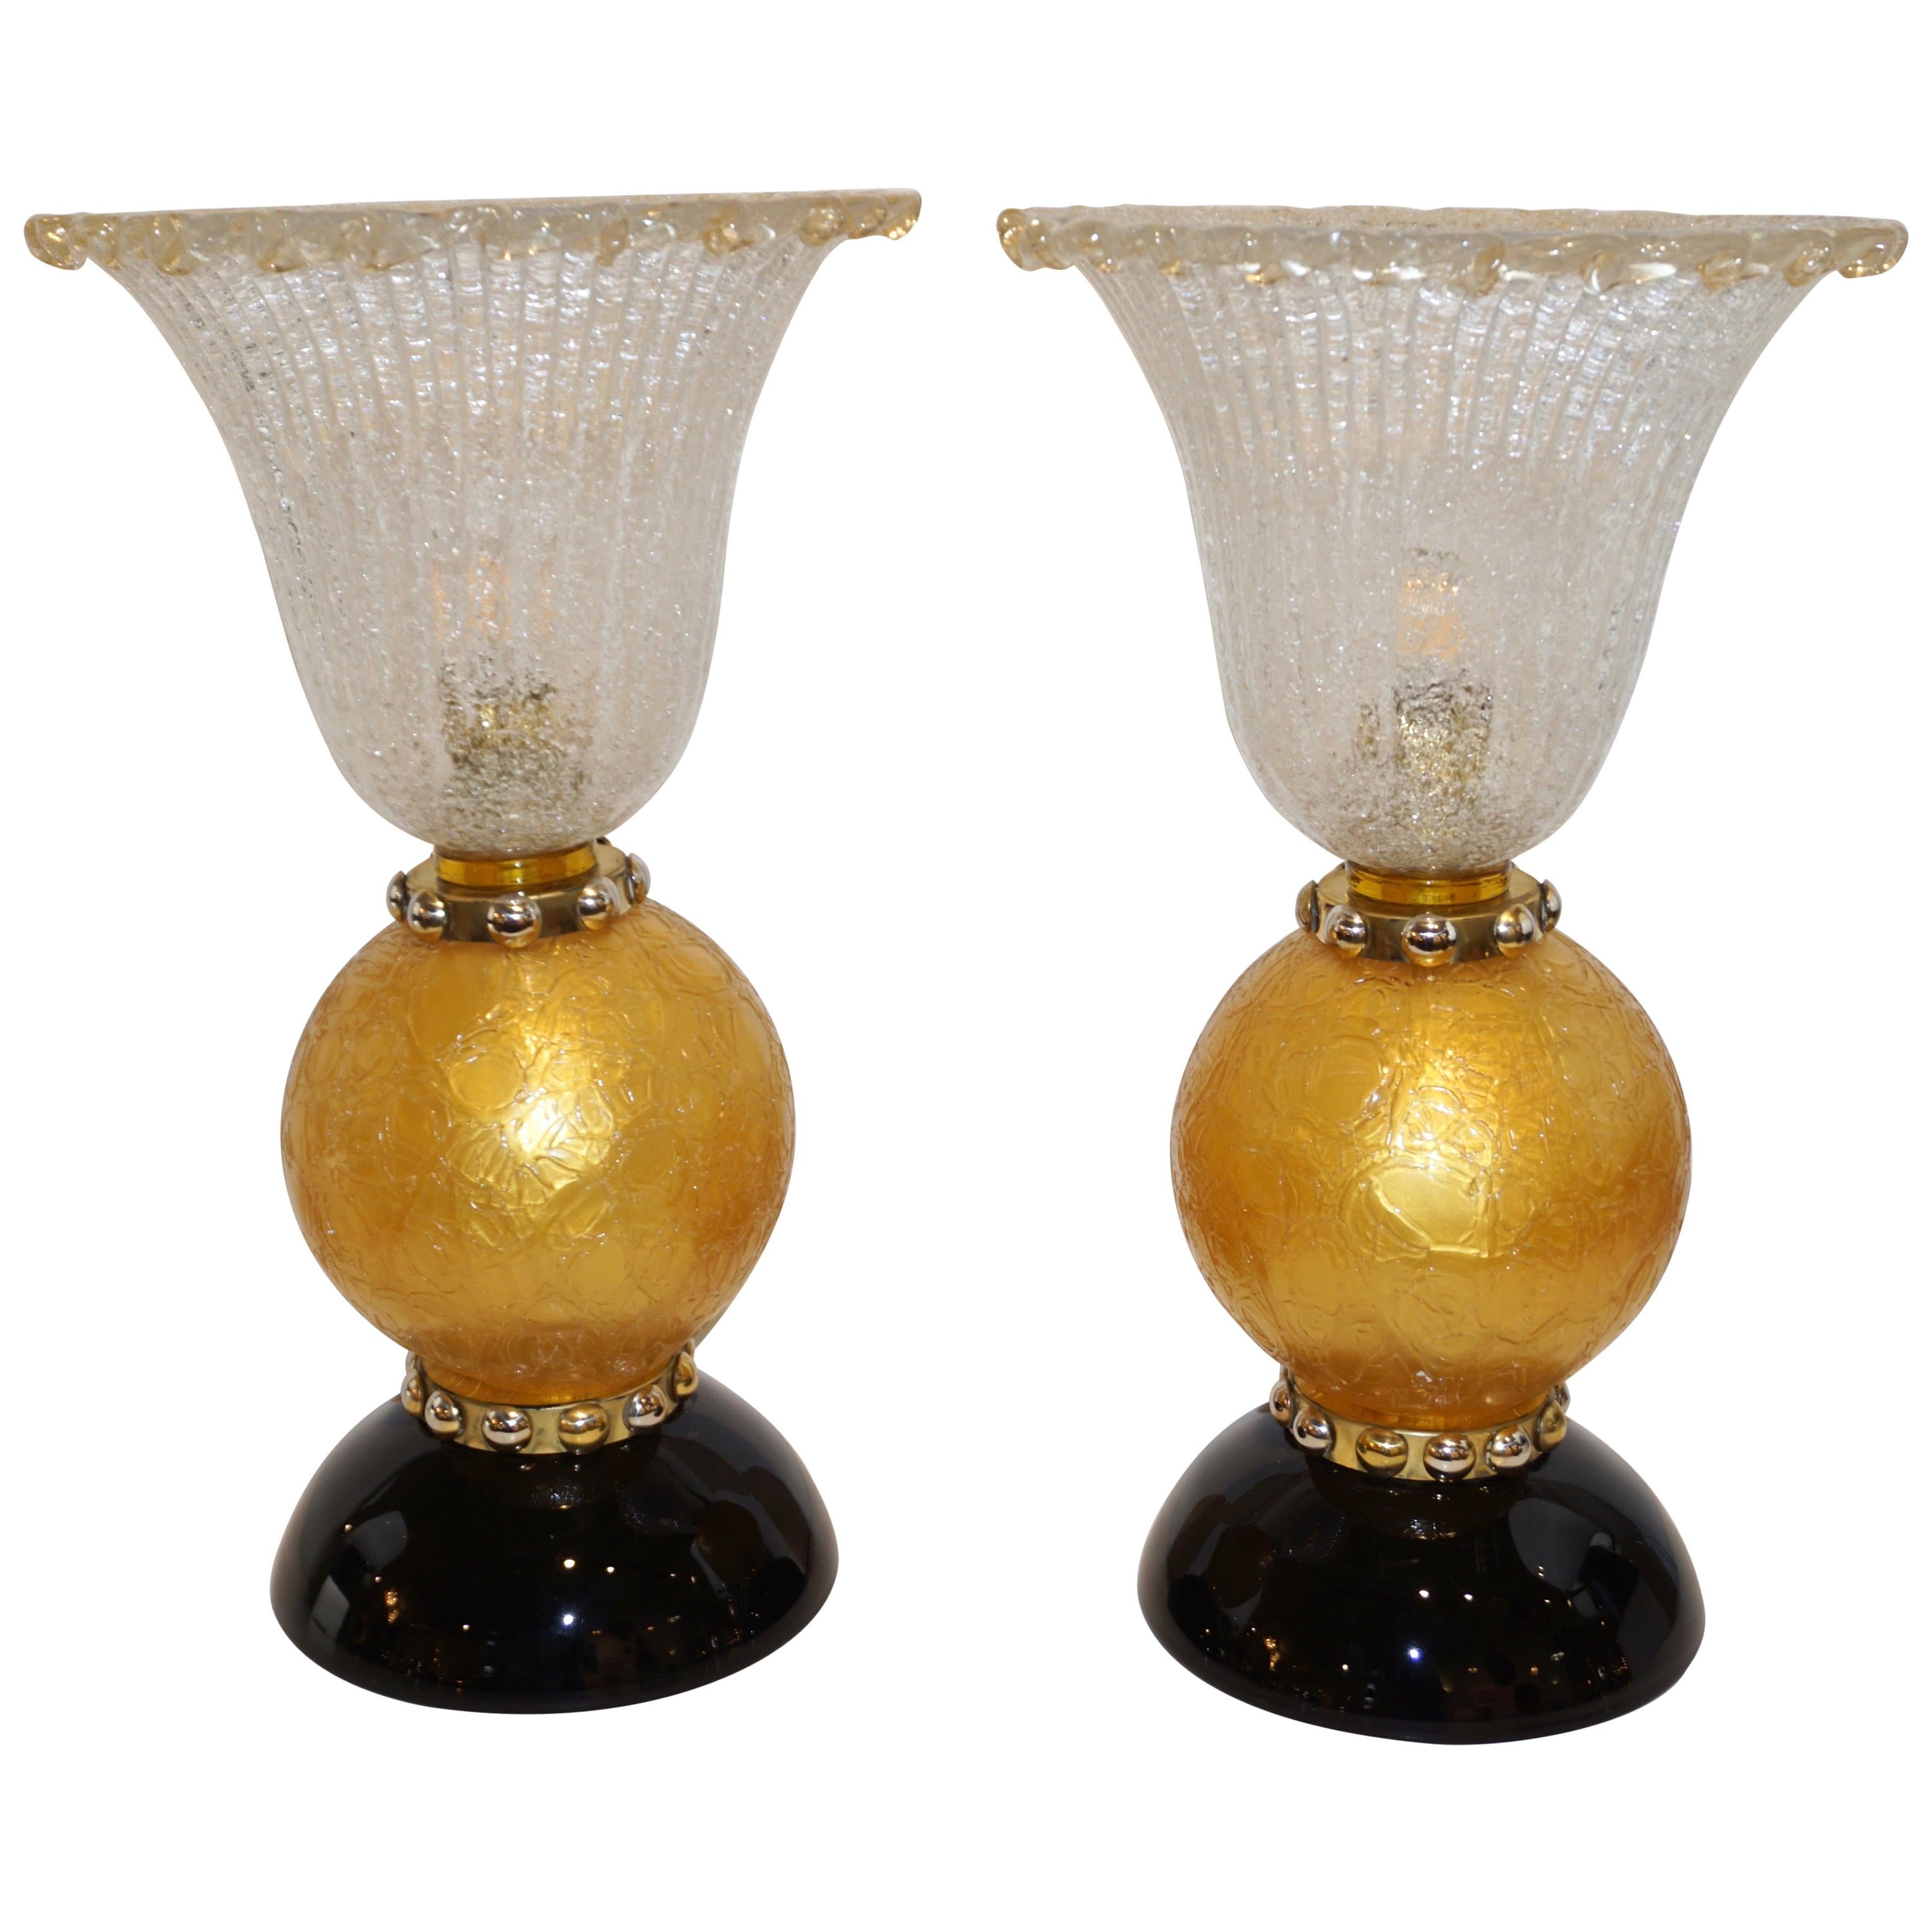 Italian Art Deco Style Gold Black Lamps with Barovier Crystal Murano Glass Shade